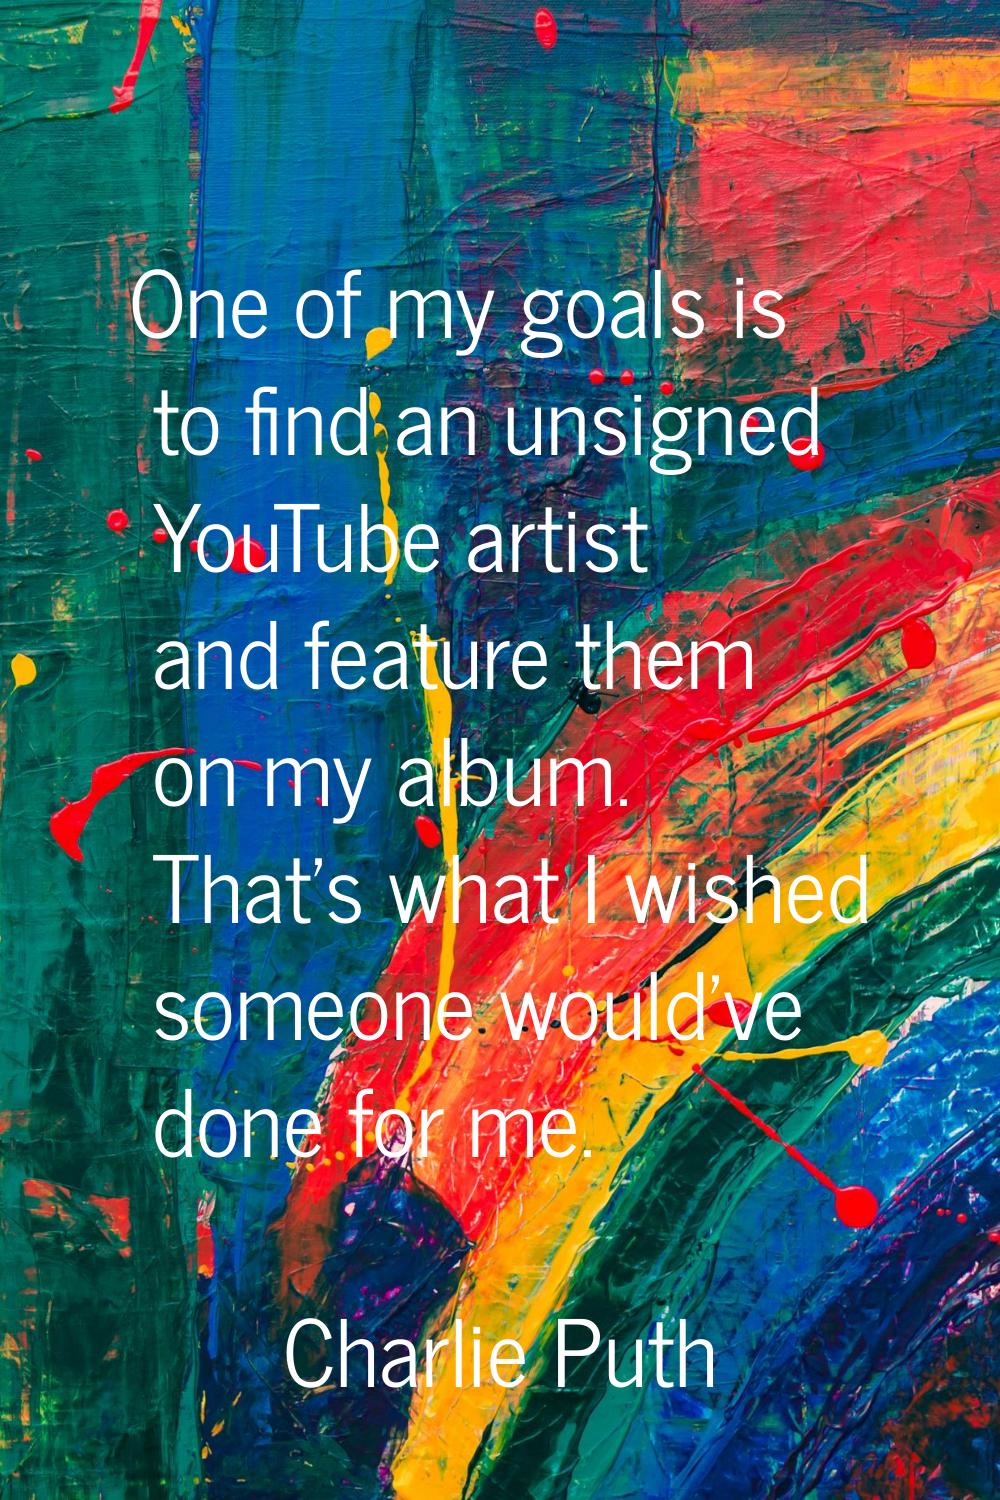 One of my goals is to find an unsigned YouTube artist and feature them on my album. That's what I w